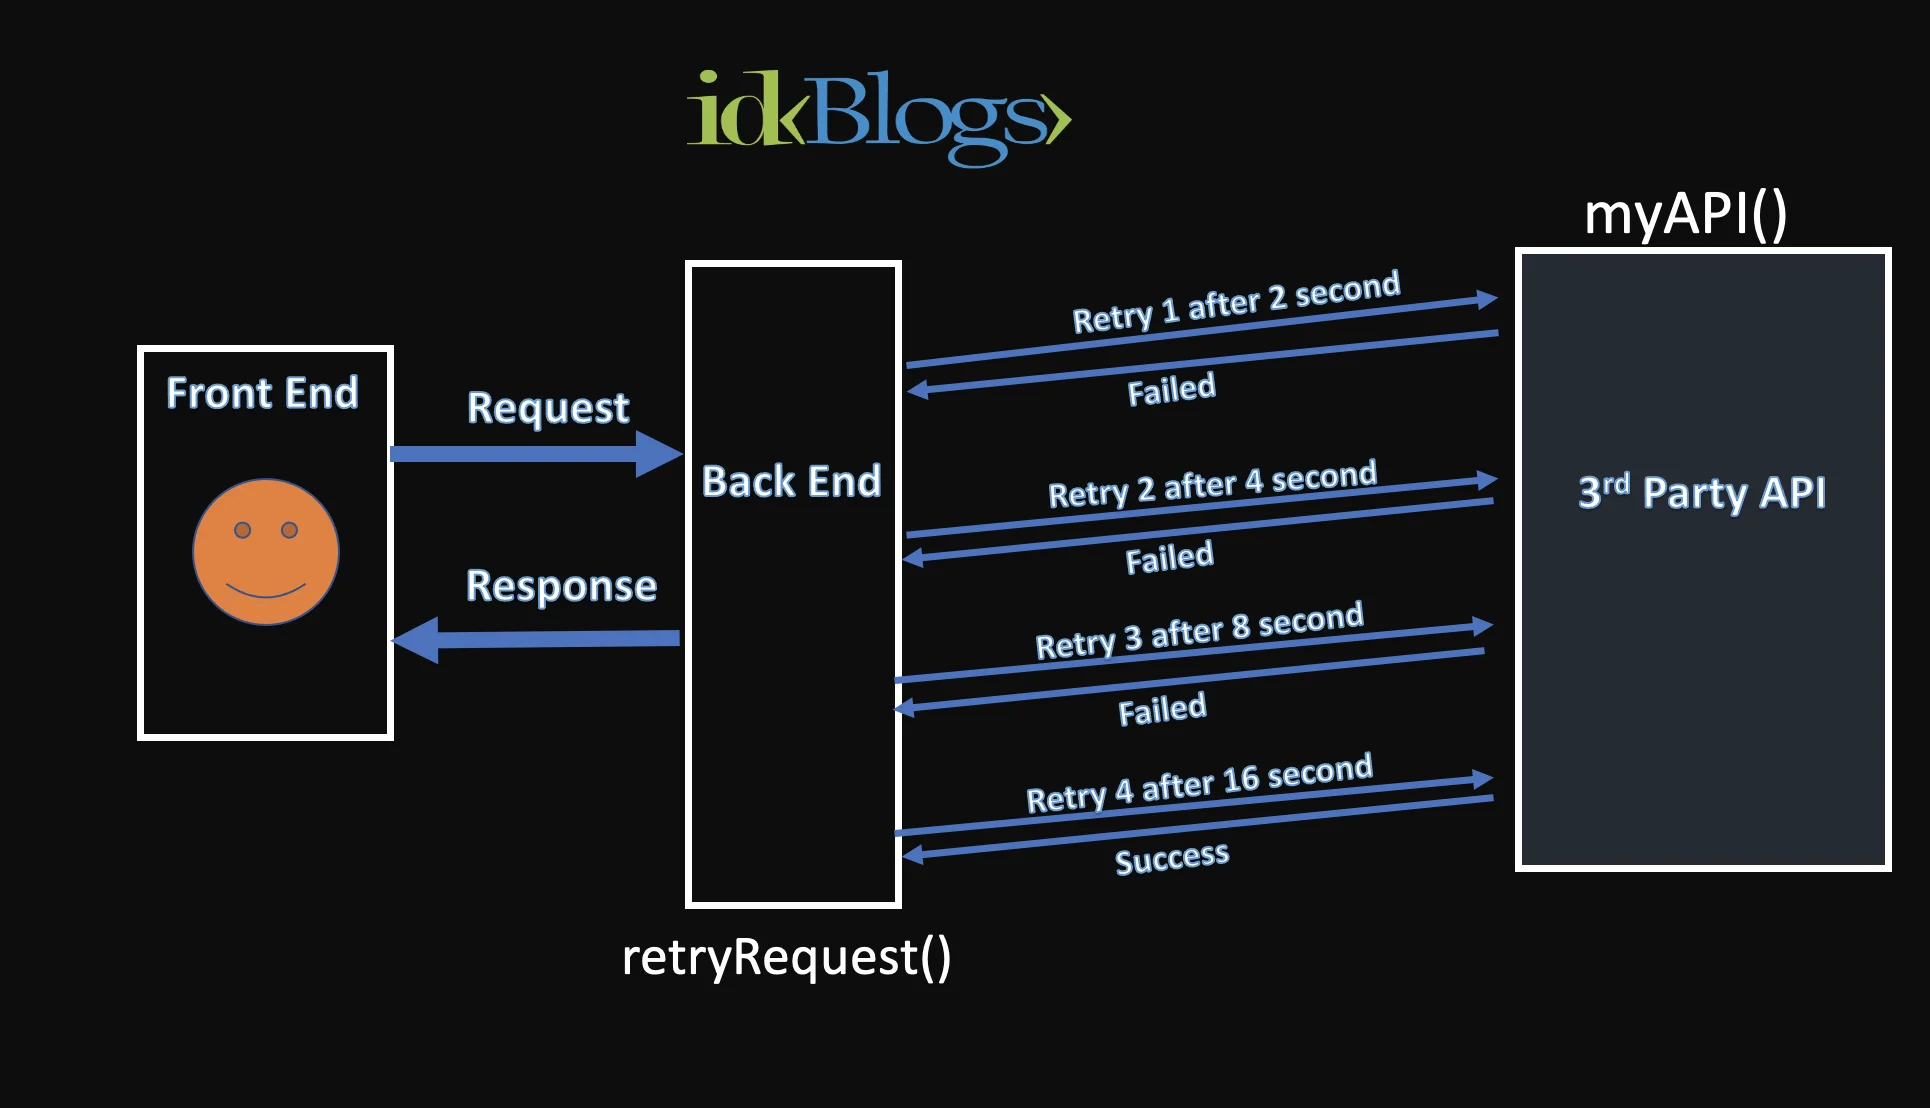 Implement Repeated API call until success with exponential wait time - Retry API Call